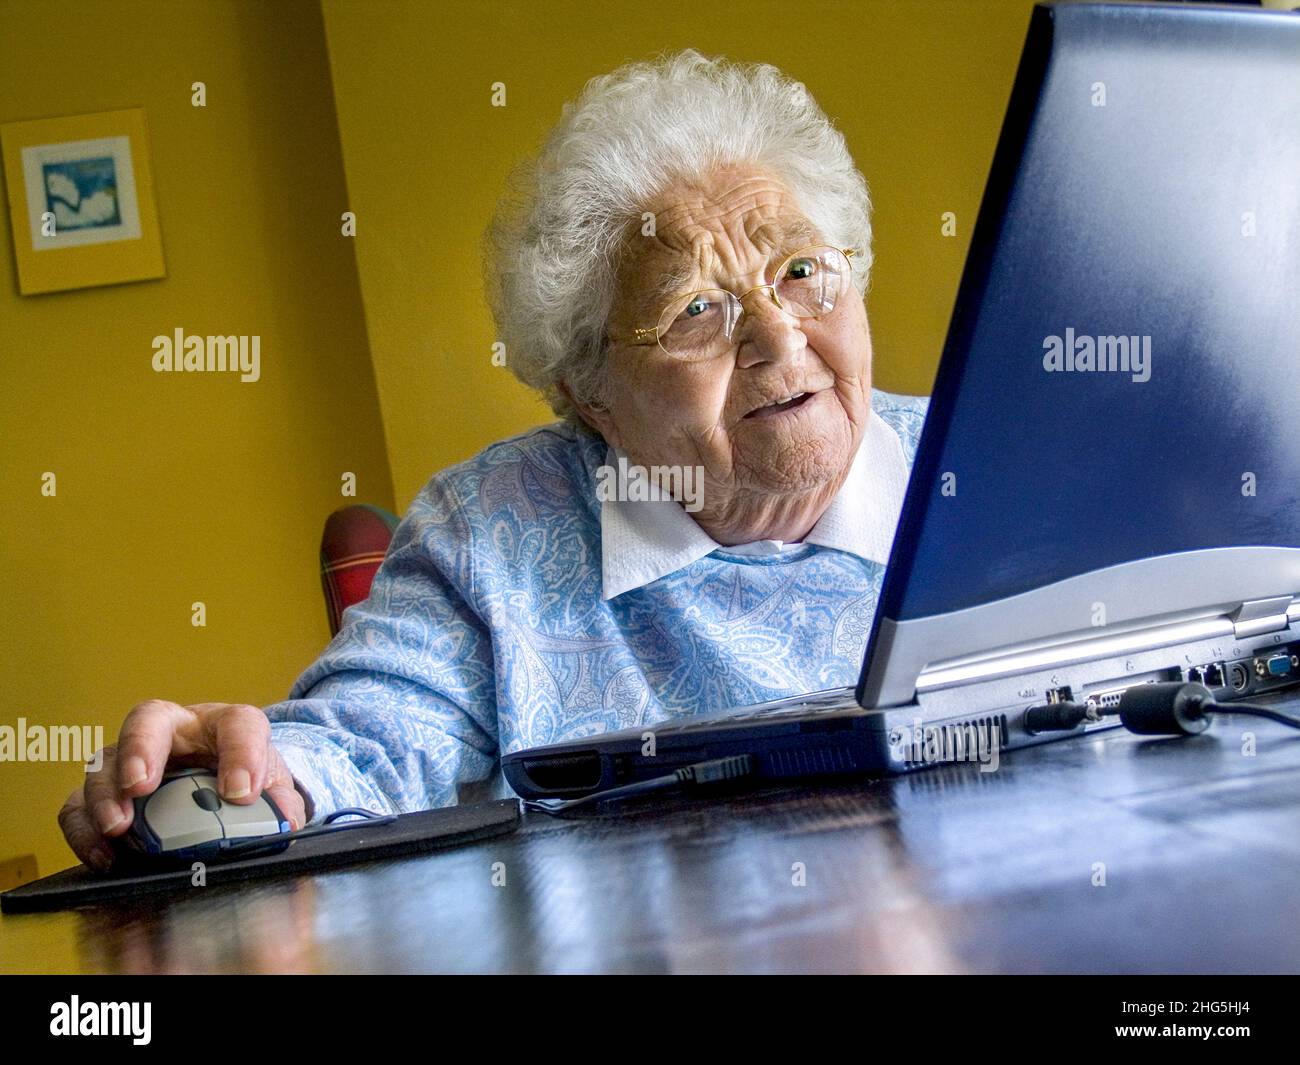 Computer elderly senior old lady 80-85 years of age, fascinated and amazed by the new computer possibilities at home, using new technology exploring and learning with her laptop computer. Stock Photo